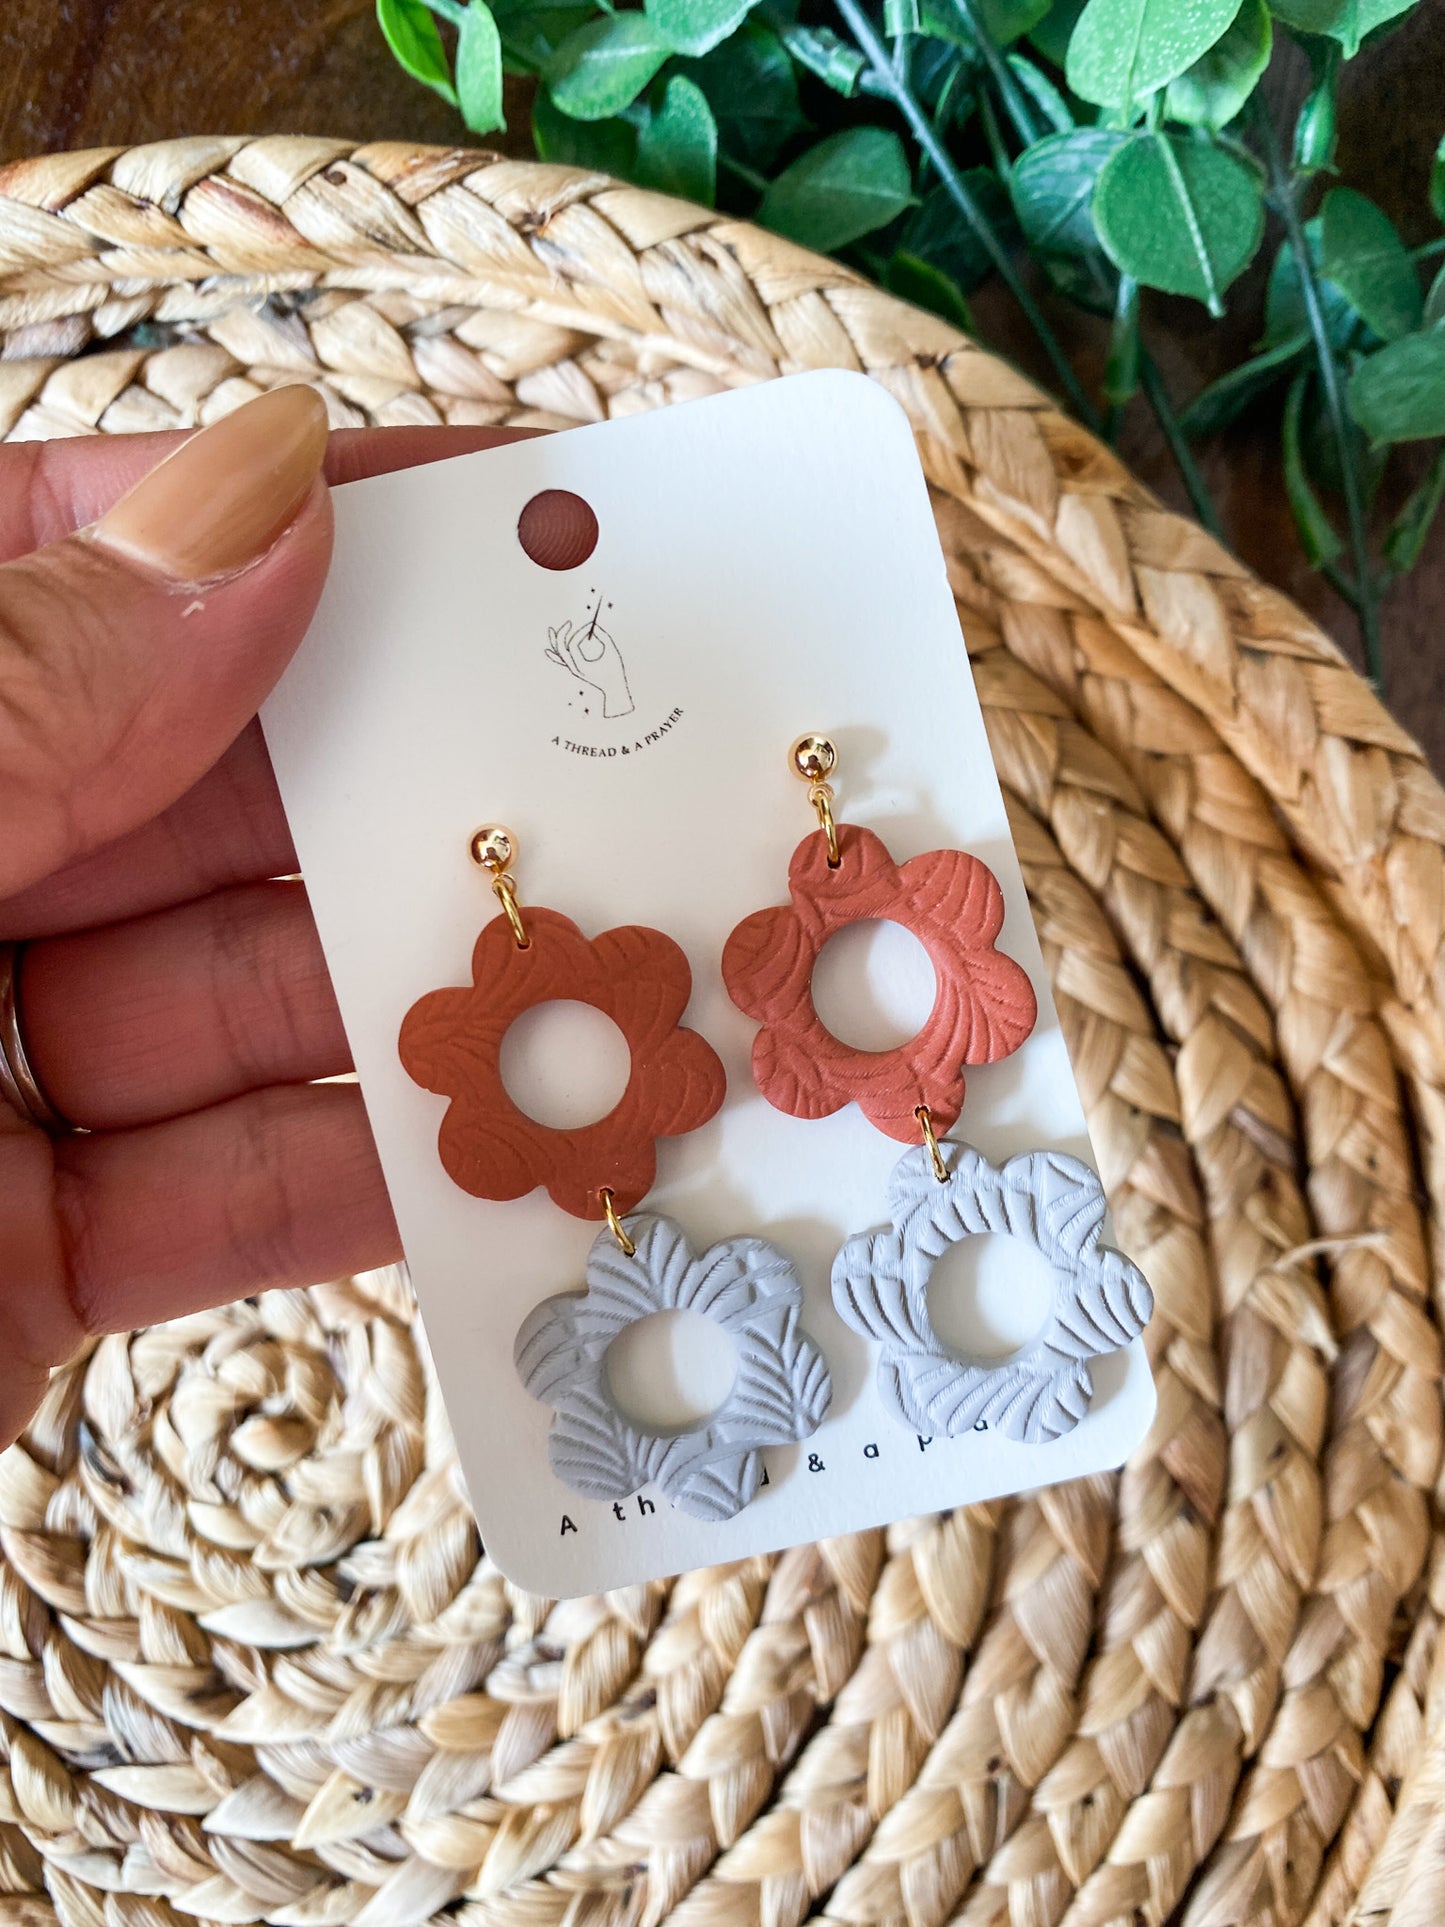 Textured Flower Power Dangles | Floral Earrings | Funky Clay Earrings | Lightweight | Fun and Bright | Summer Color Earrings